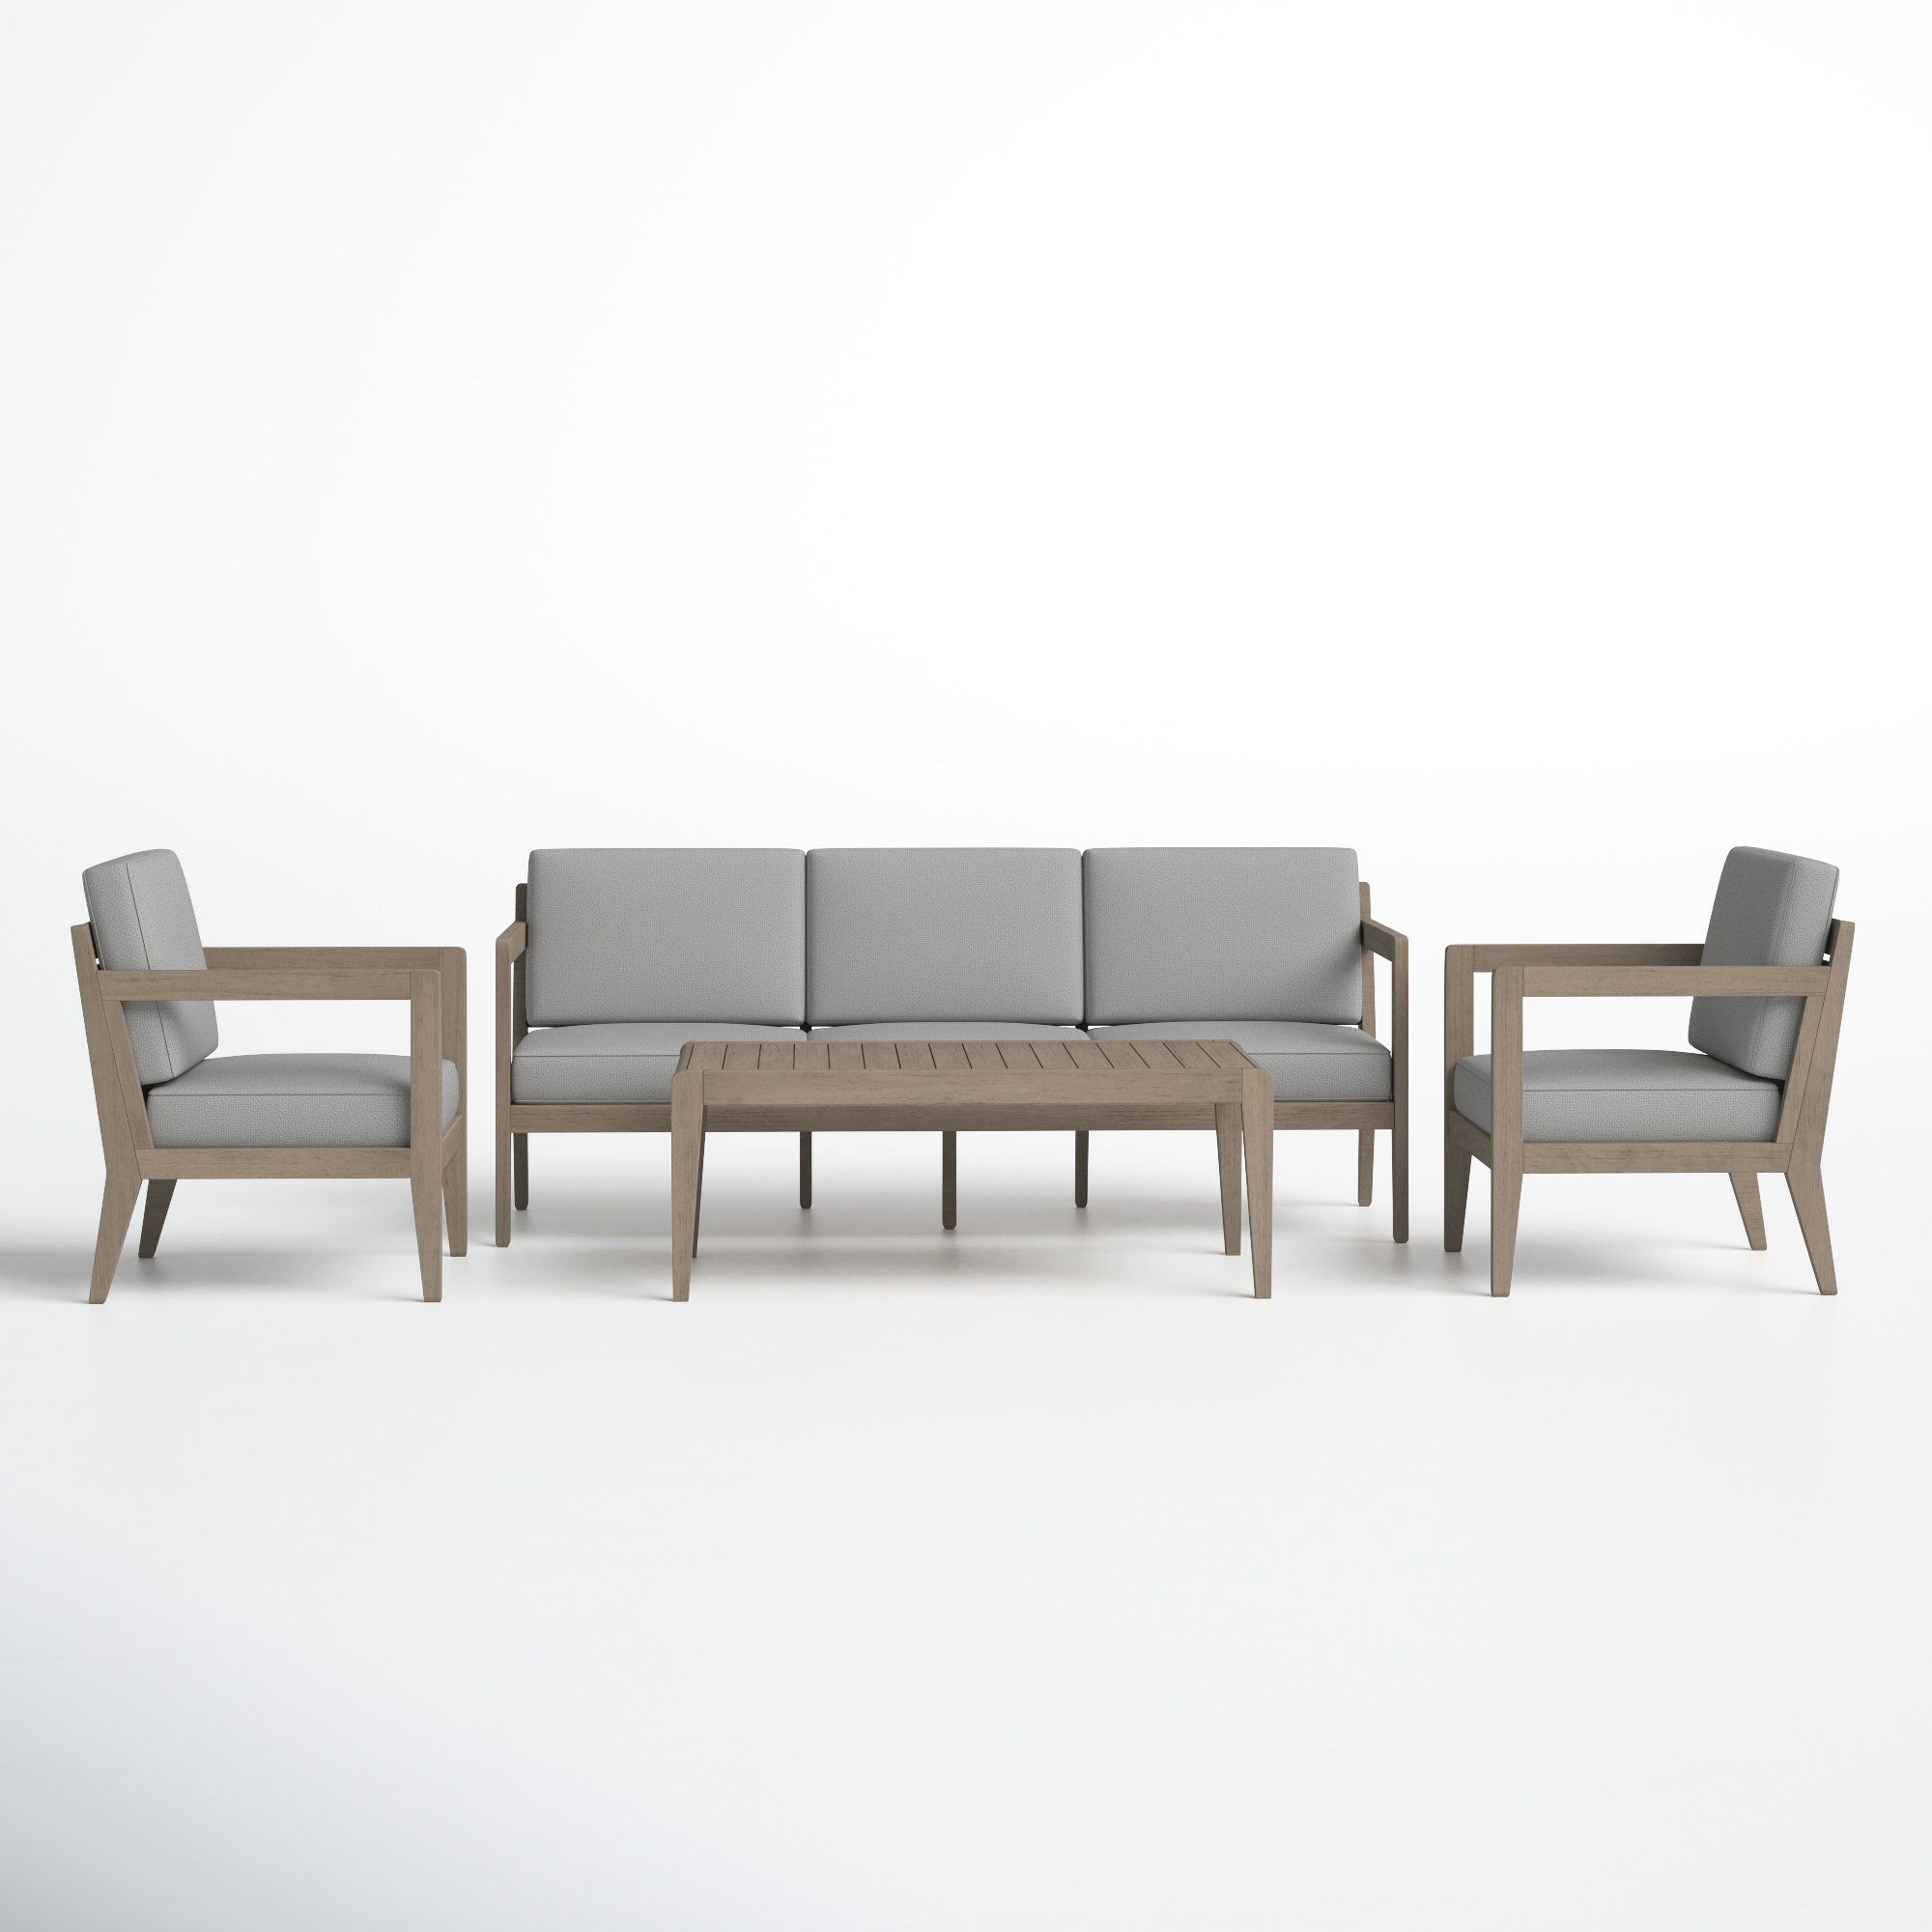 Ojai 4 Piece Outdoor Set, With Sofa, Coffee Table, And 2 Lounge Chairs &  Reviews | Joss & Main In Outdoor 2 Arm Chairs And Coffee Table (Photo 8 of 15)